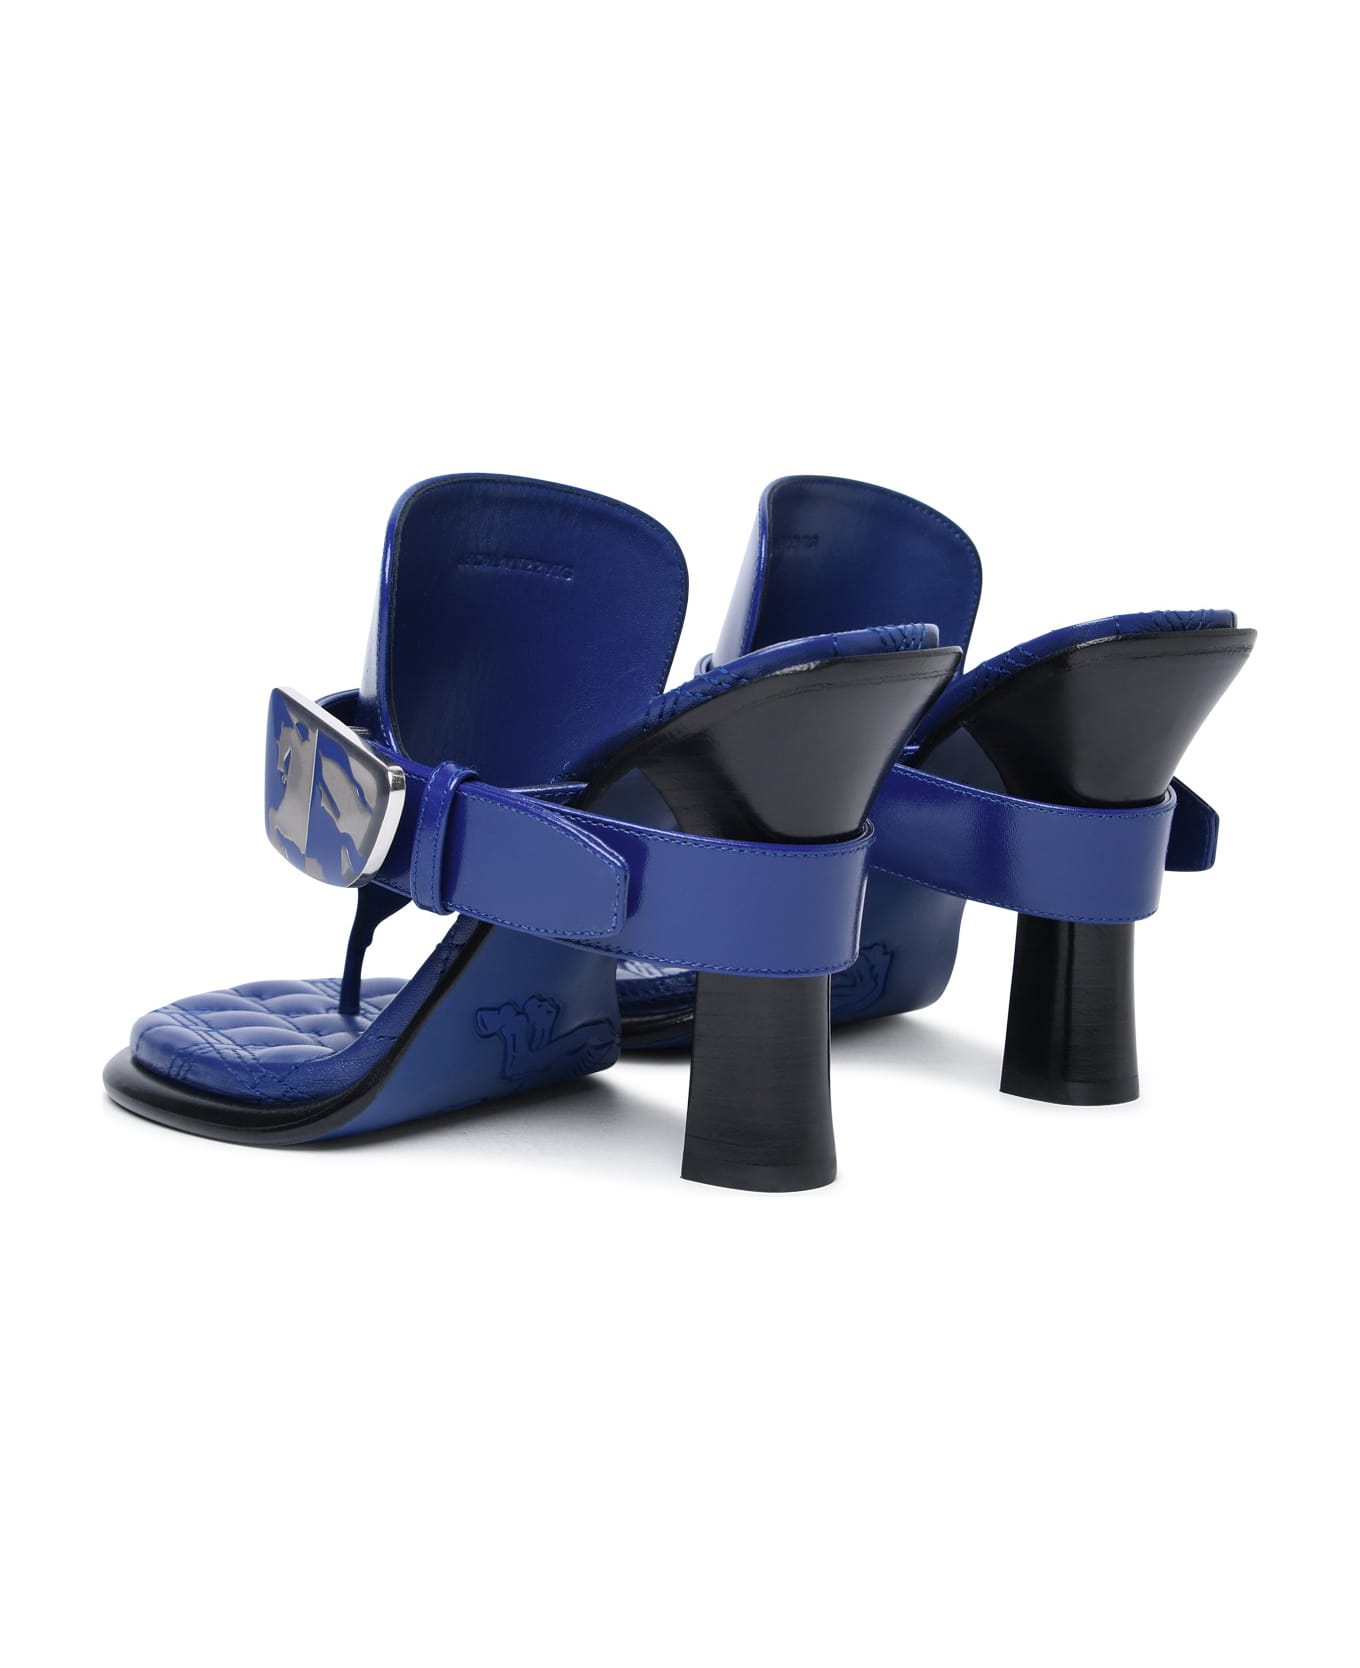 Burberry 'bay' Blue Leather Sandals - Blue